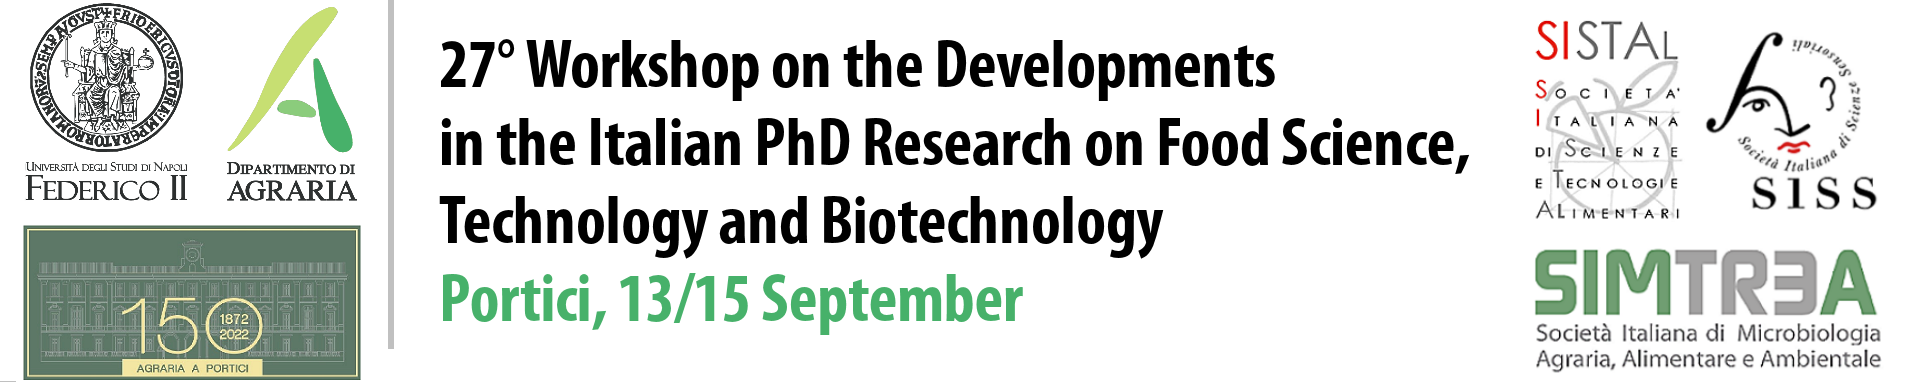 27th Workshop on the Developments in the Italian PhD Research on Food Science Technology and Biotechnology